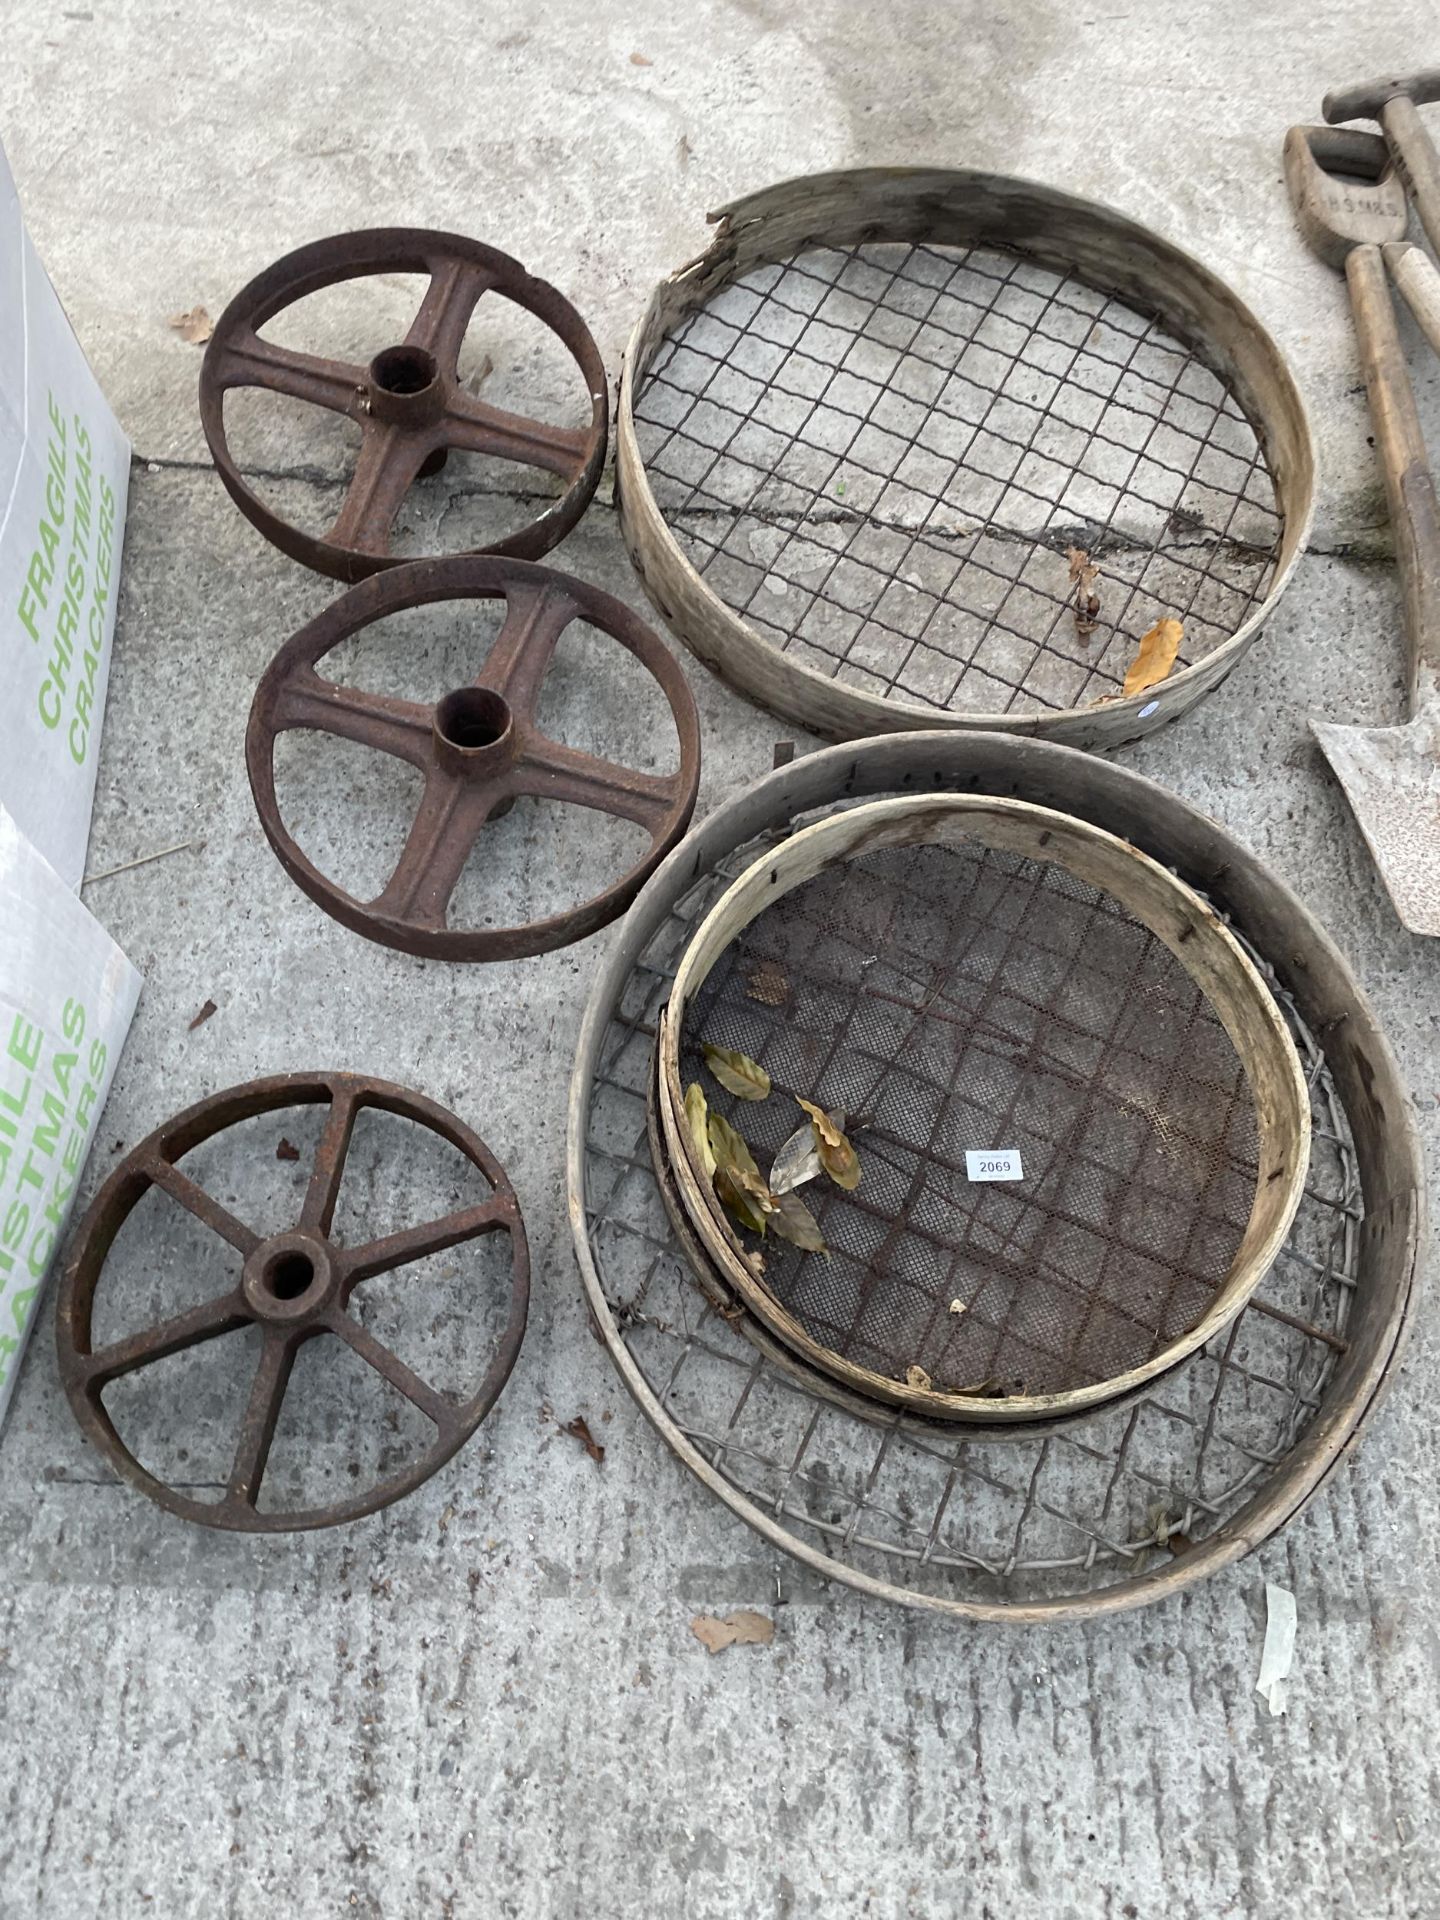 THREE VINTAGE RIDDLE SIEVES AND THREE PULLEY WHEELS